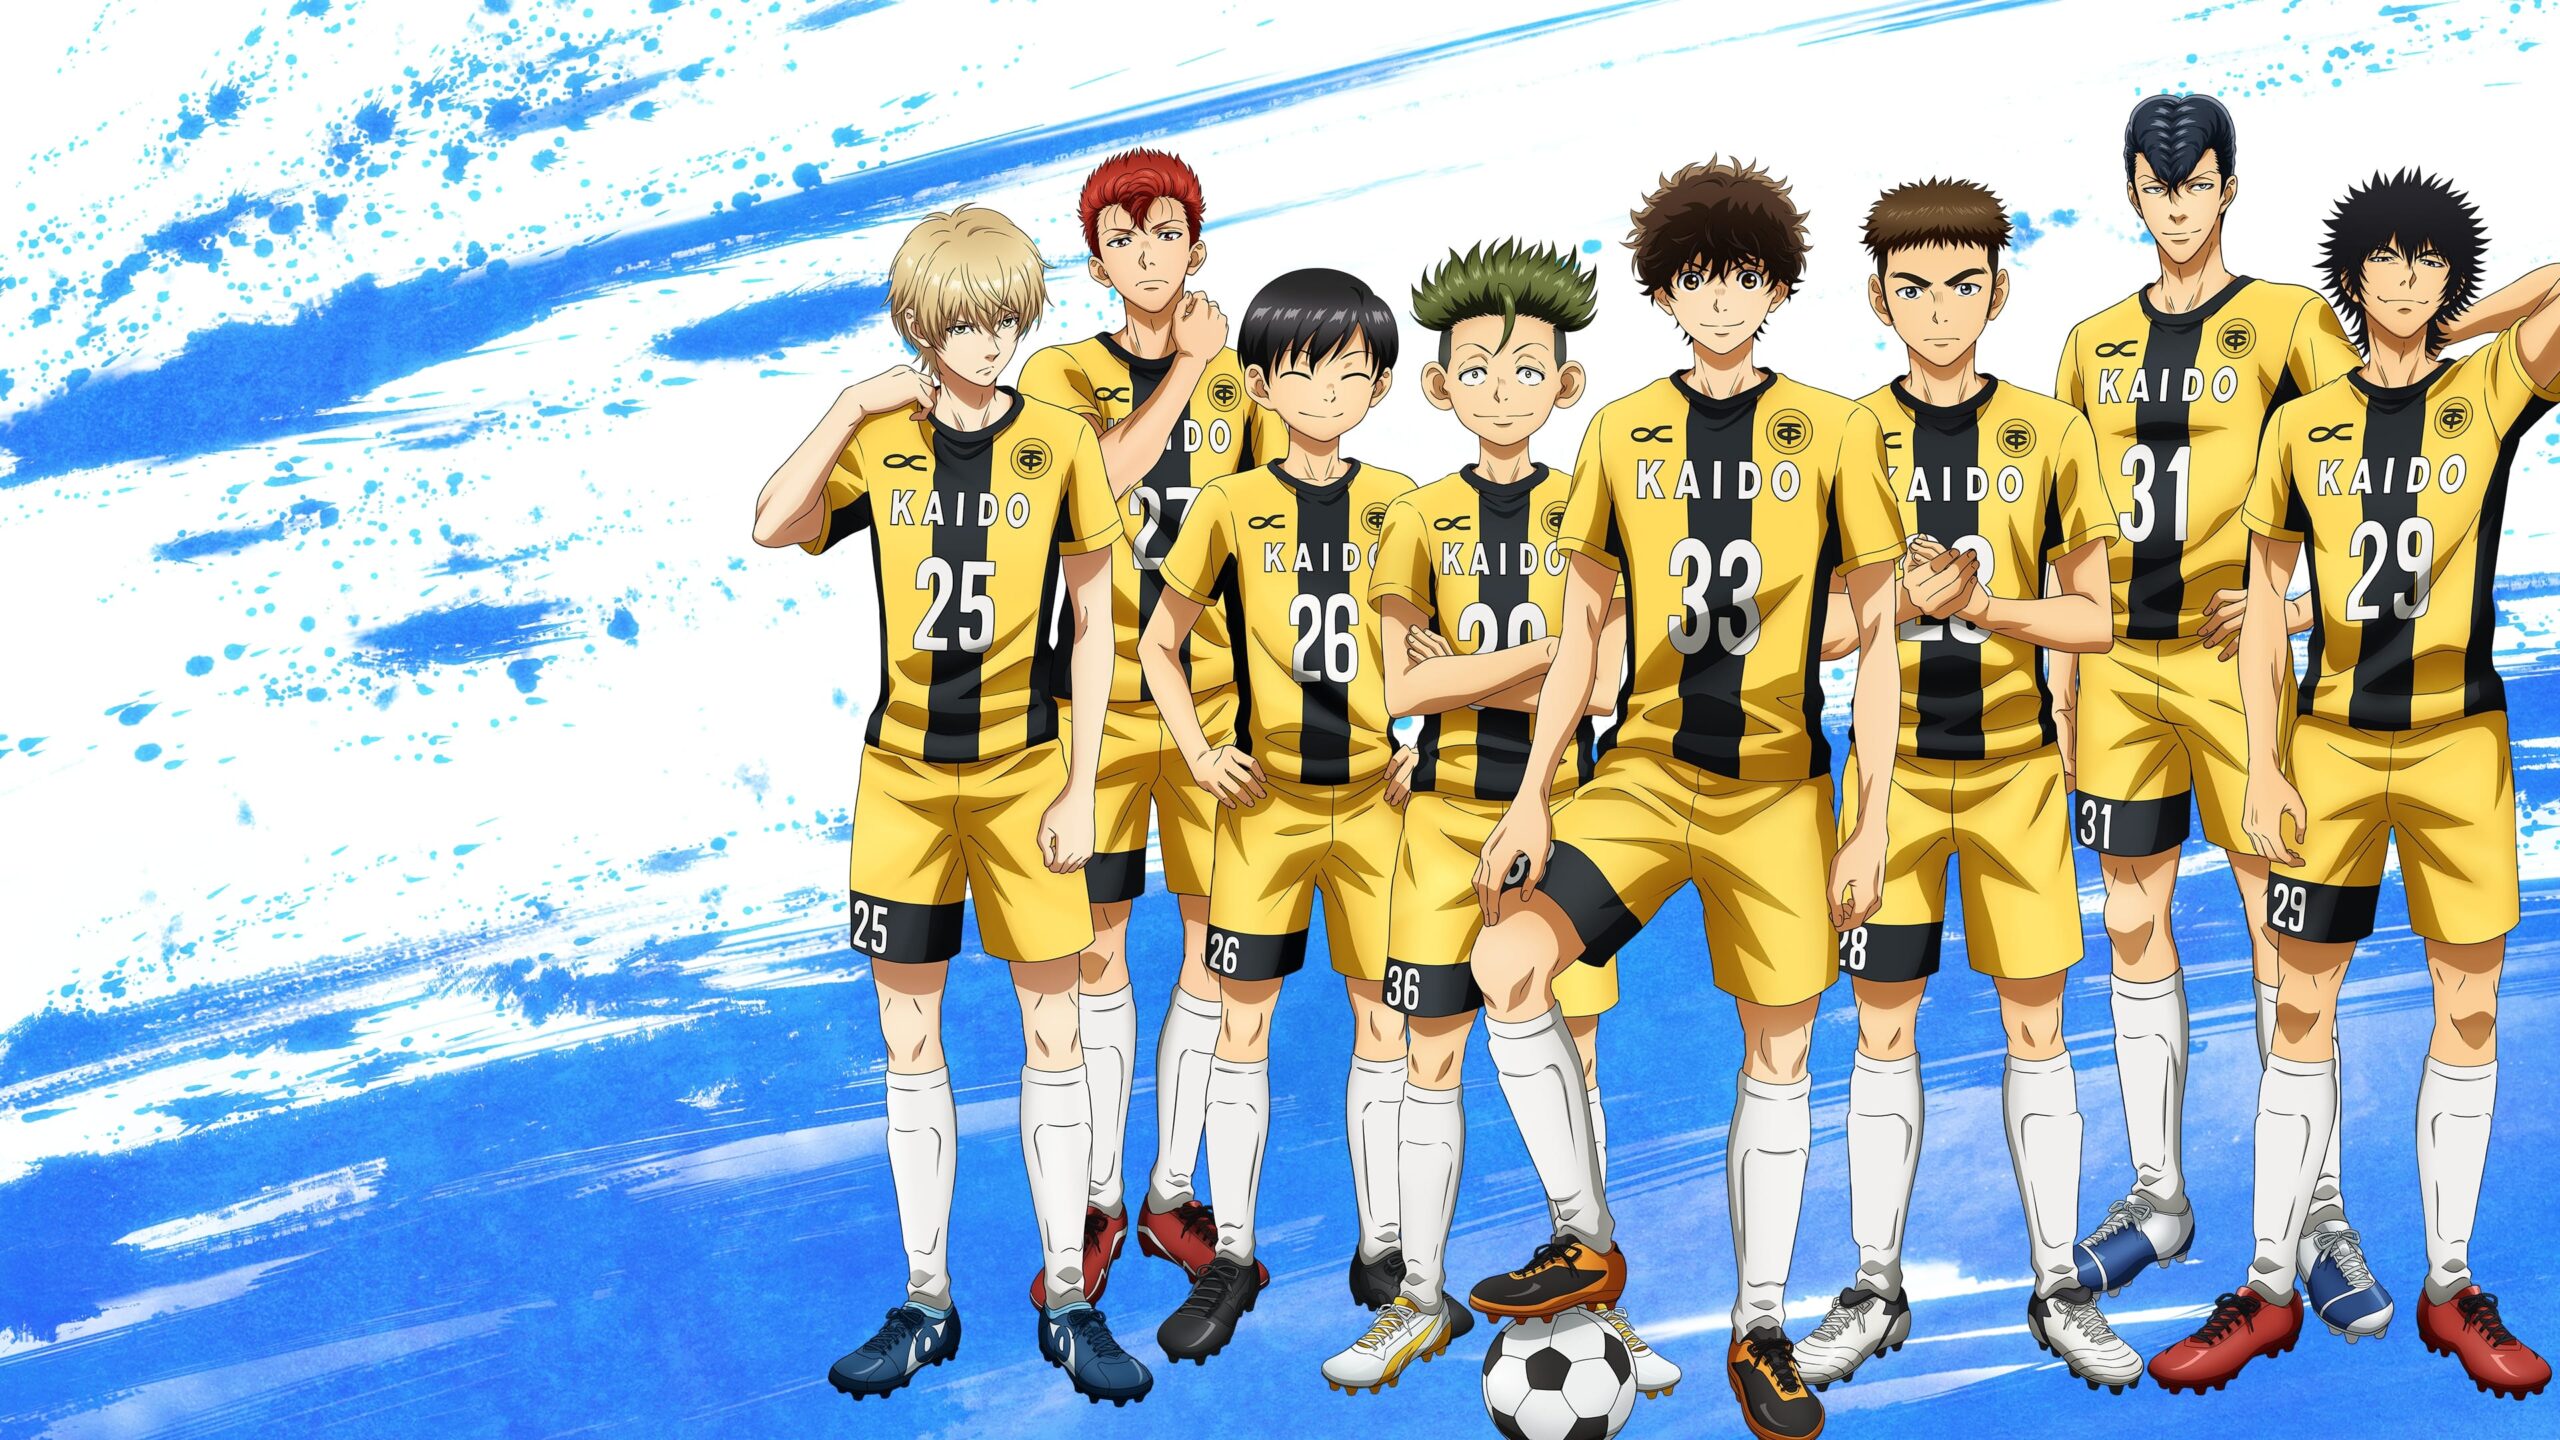 Is Ao Ashi Anime Getting a Season 2? What We Know About the Fan-Favorite Soccer Series' Future